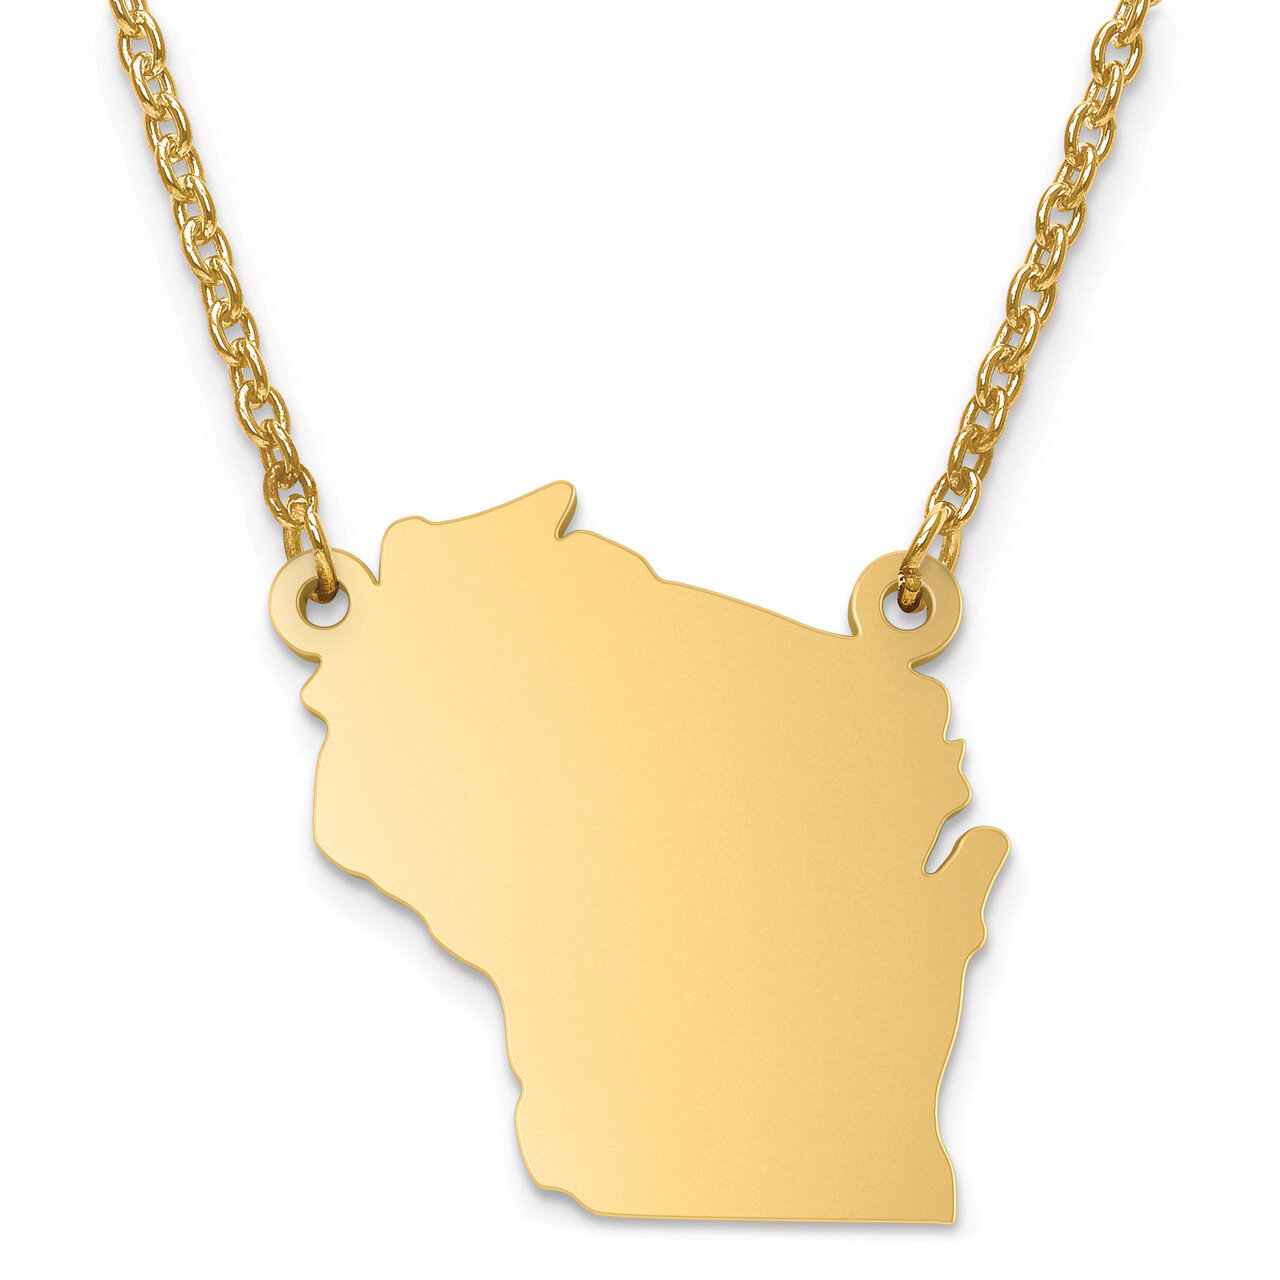 Wisconsin State Pendant with Chain Engravable Gold-plated on Sterling Silver